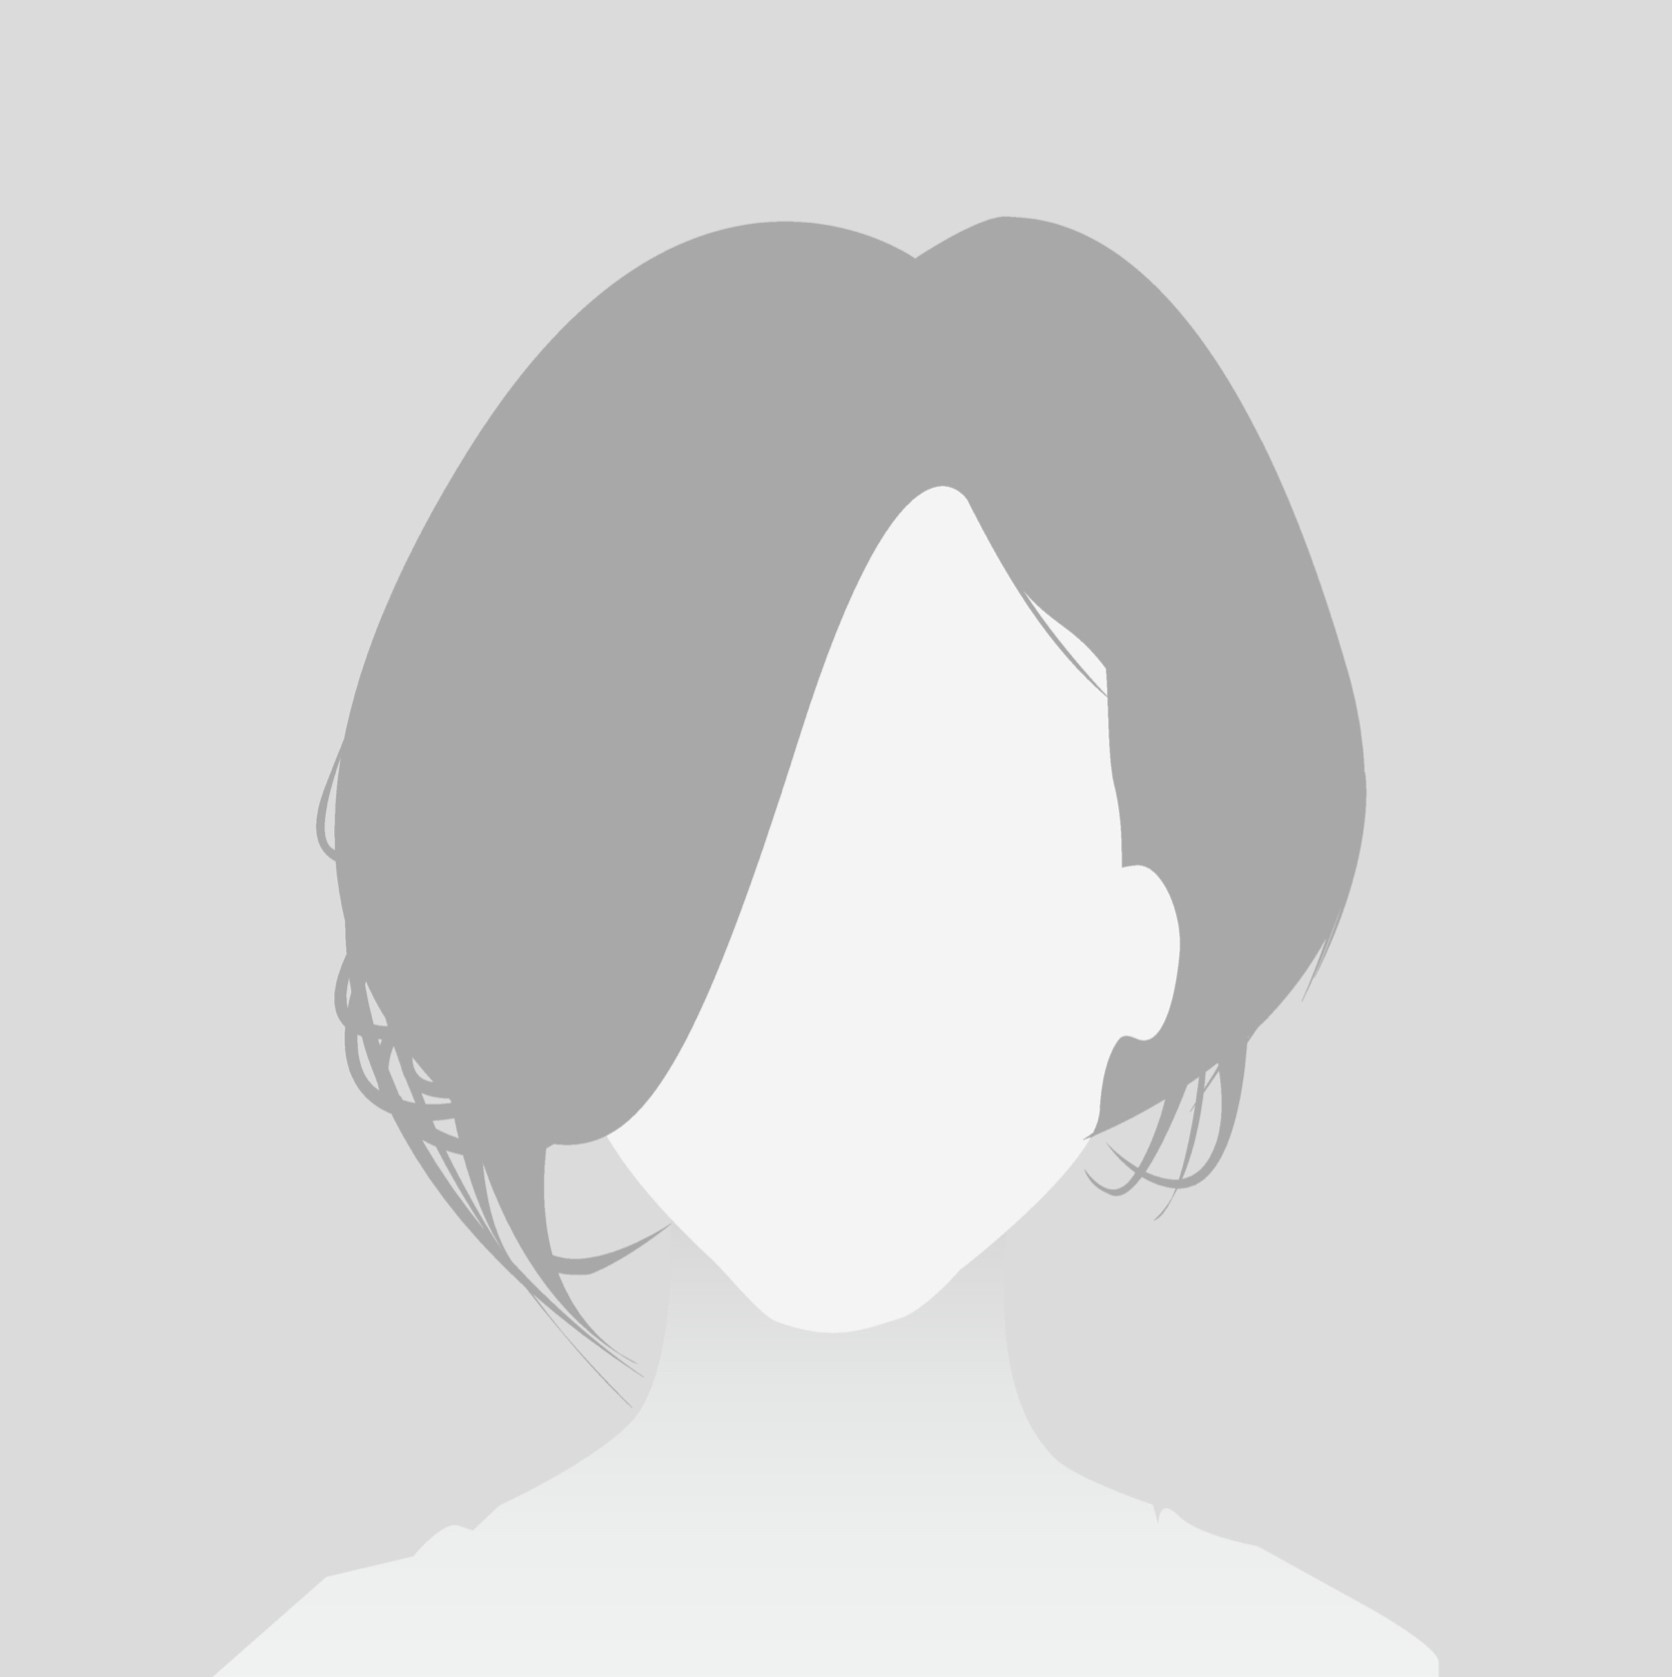 Default Placeholder Avatar Profile on Gray Background. Man and Woman